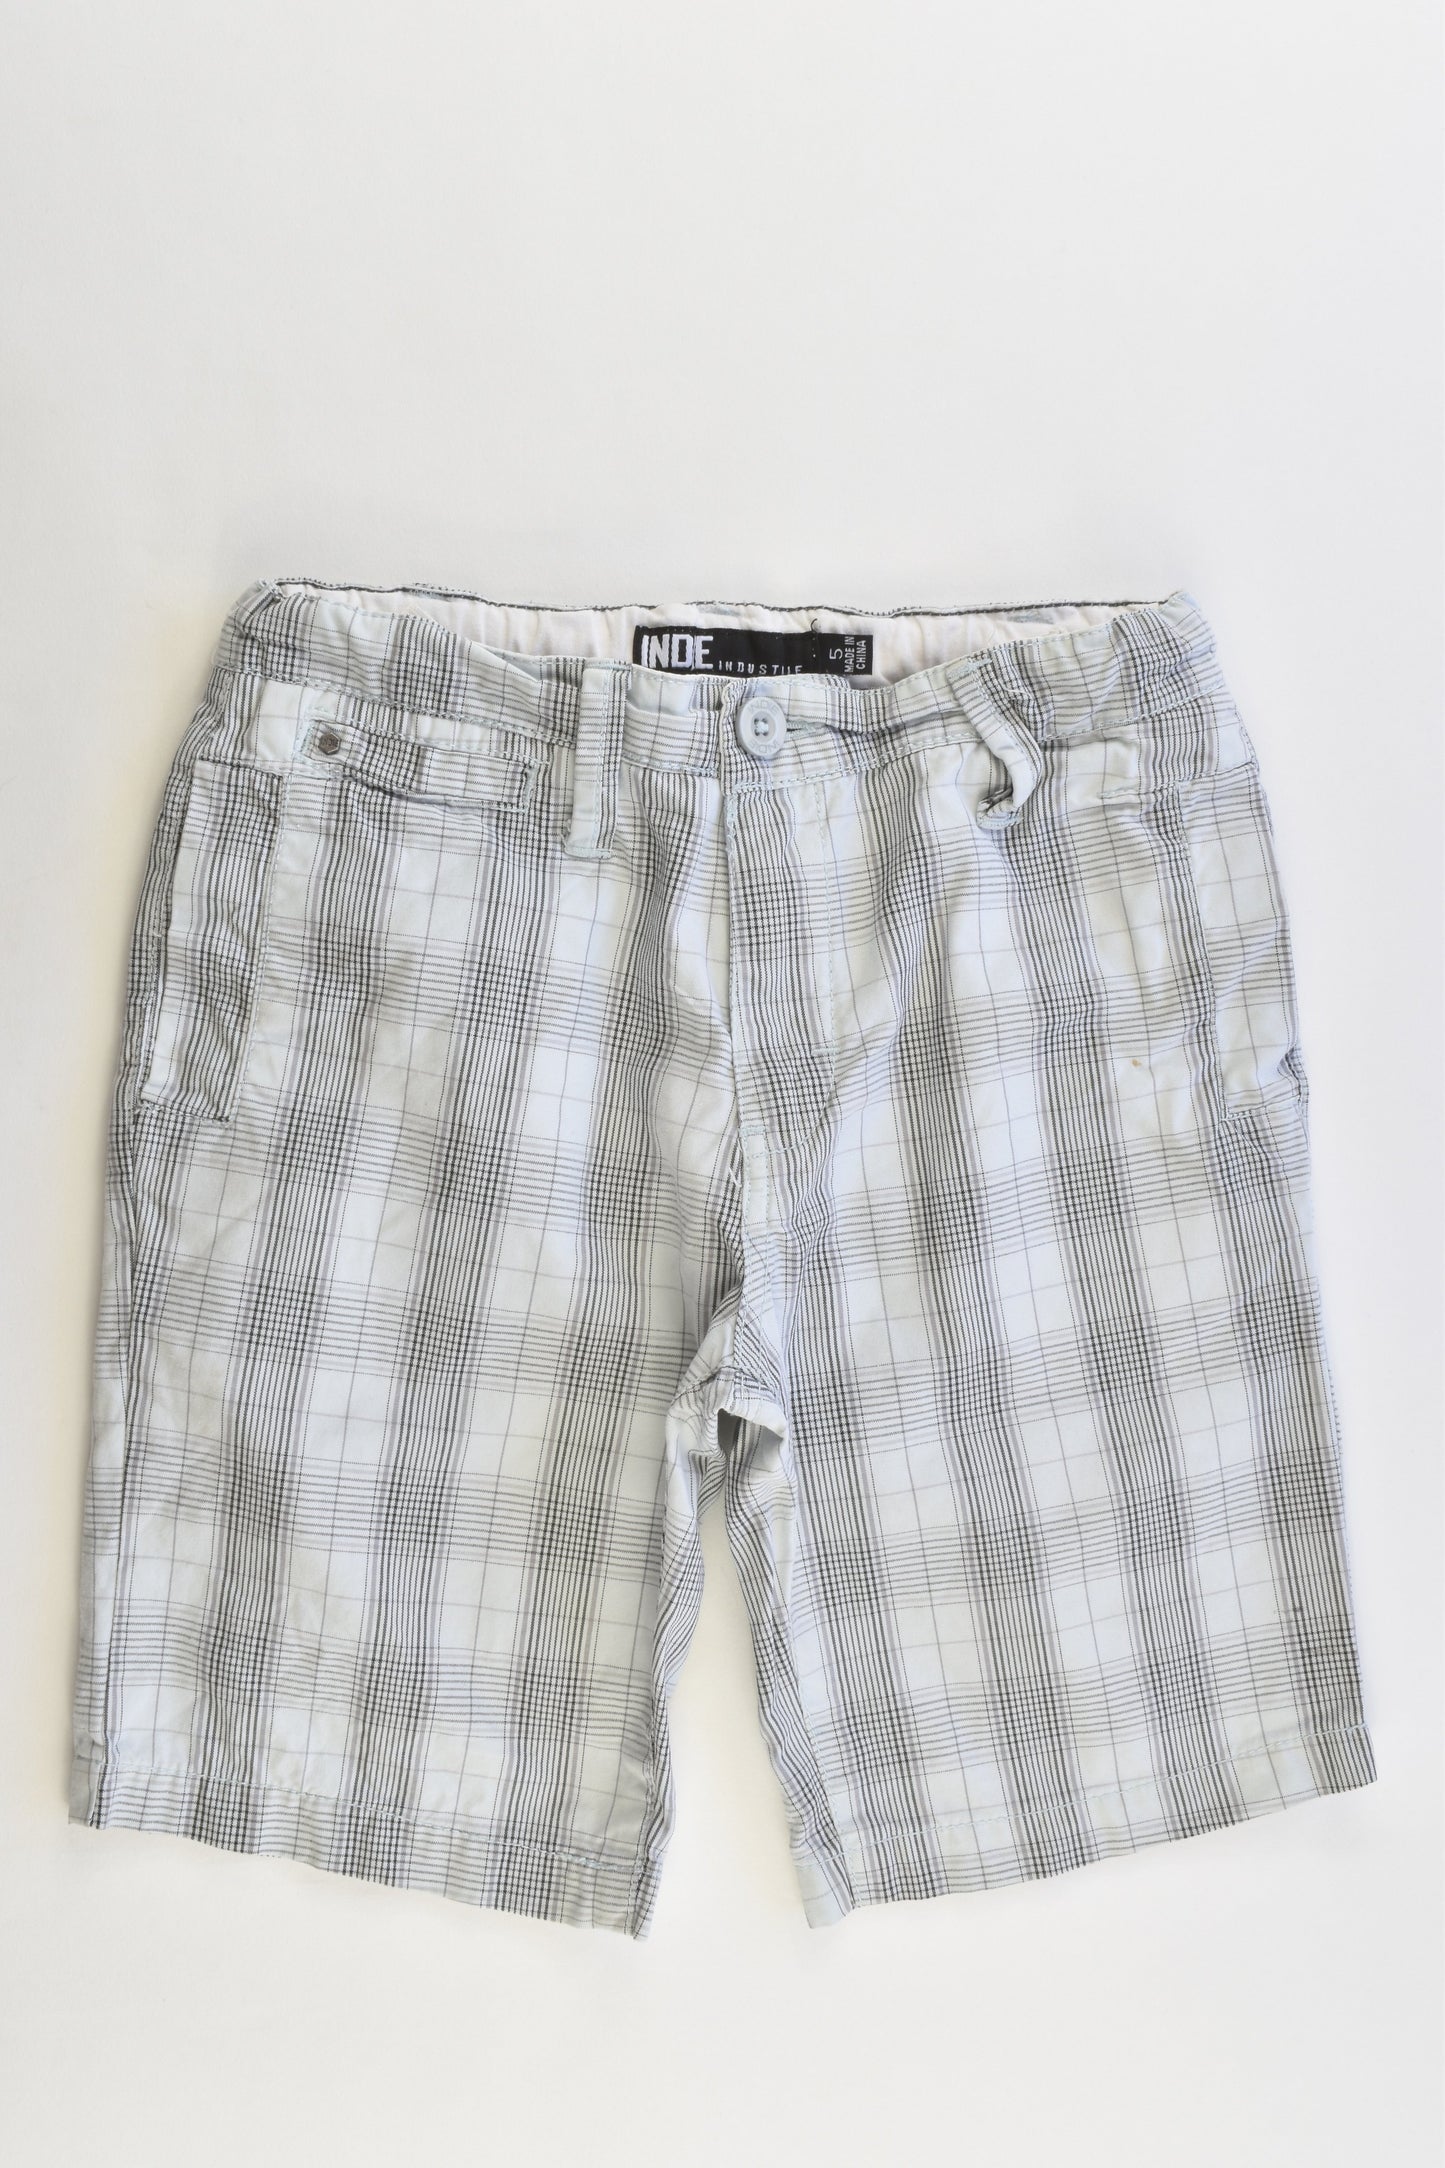 Indie by Industrie Size 5 Shorts